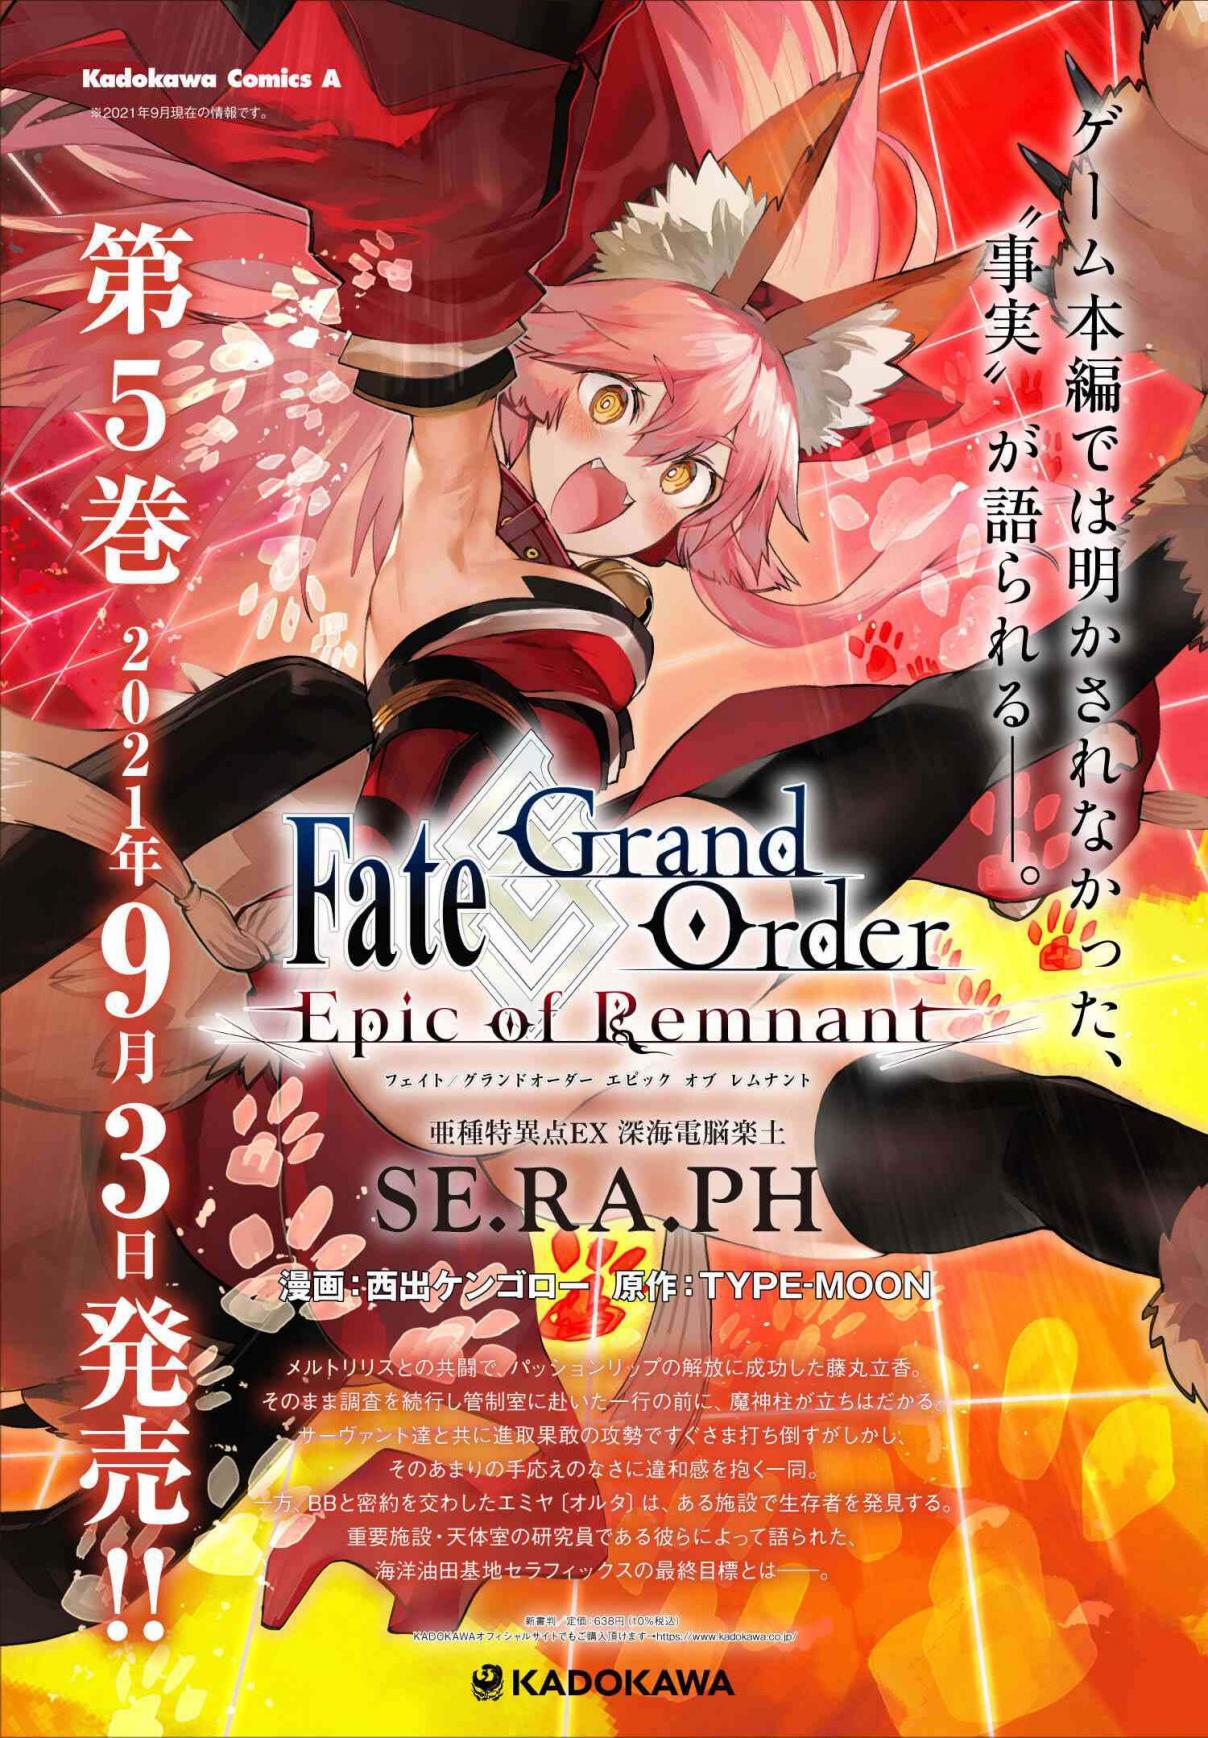 Fate/Grand Order: Epic of Remnant - Deep Sea Cyber-Paradise SE.RA.PH 26.1